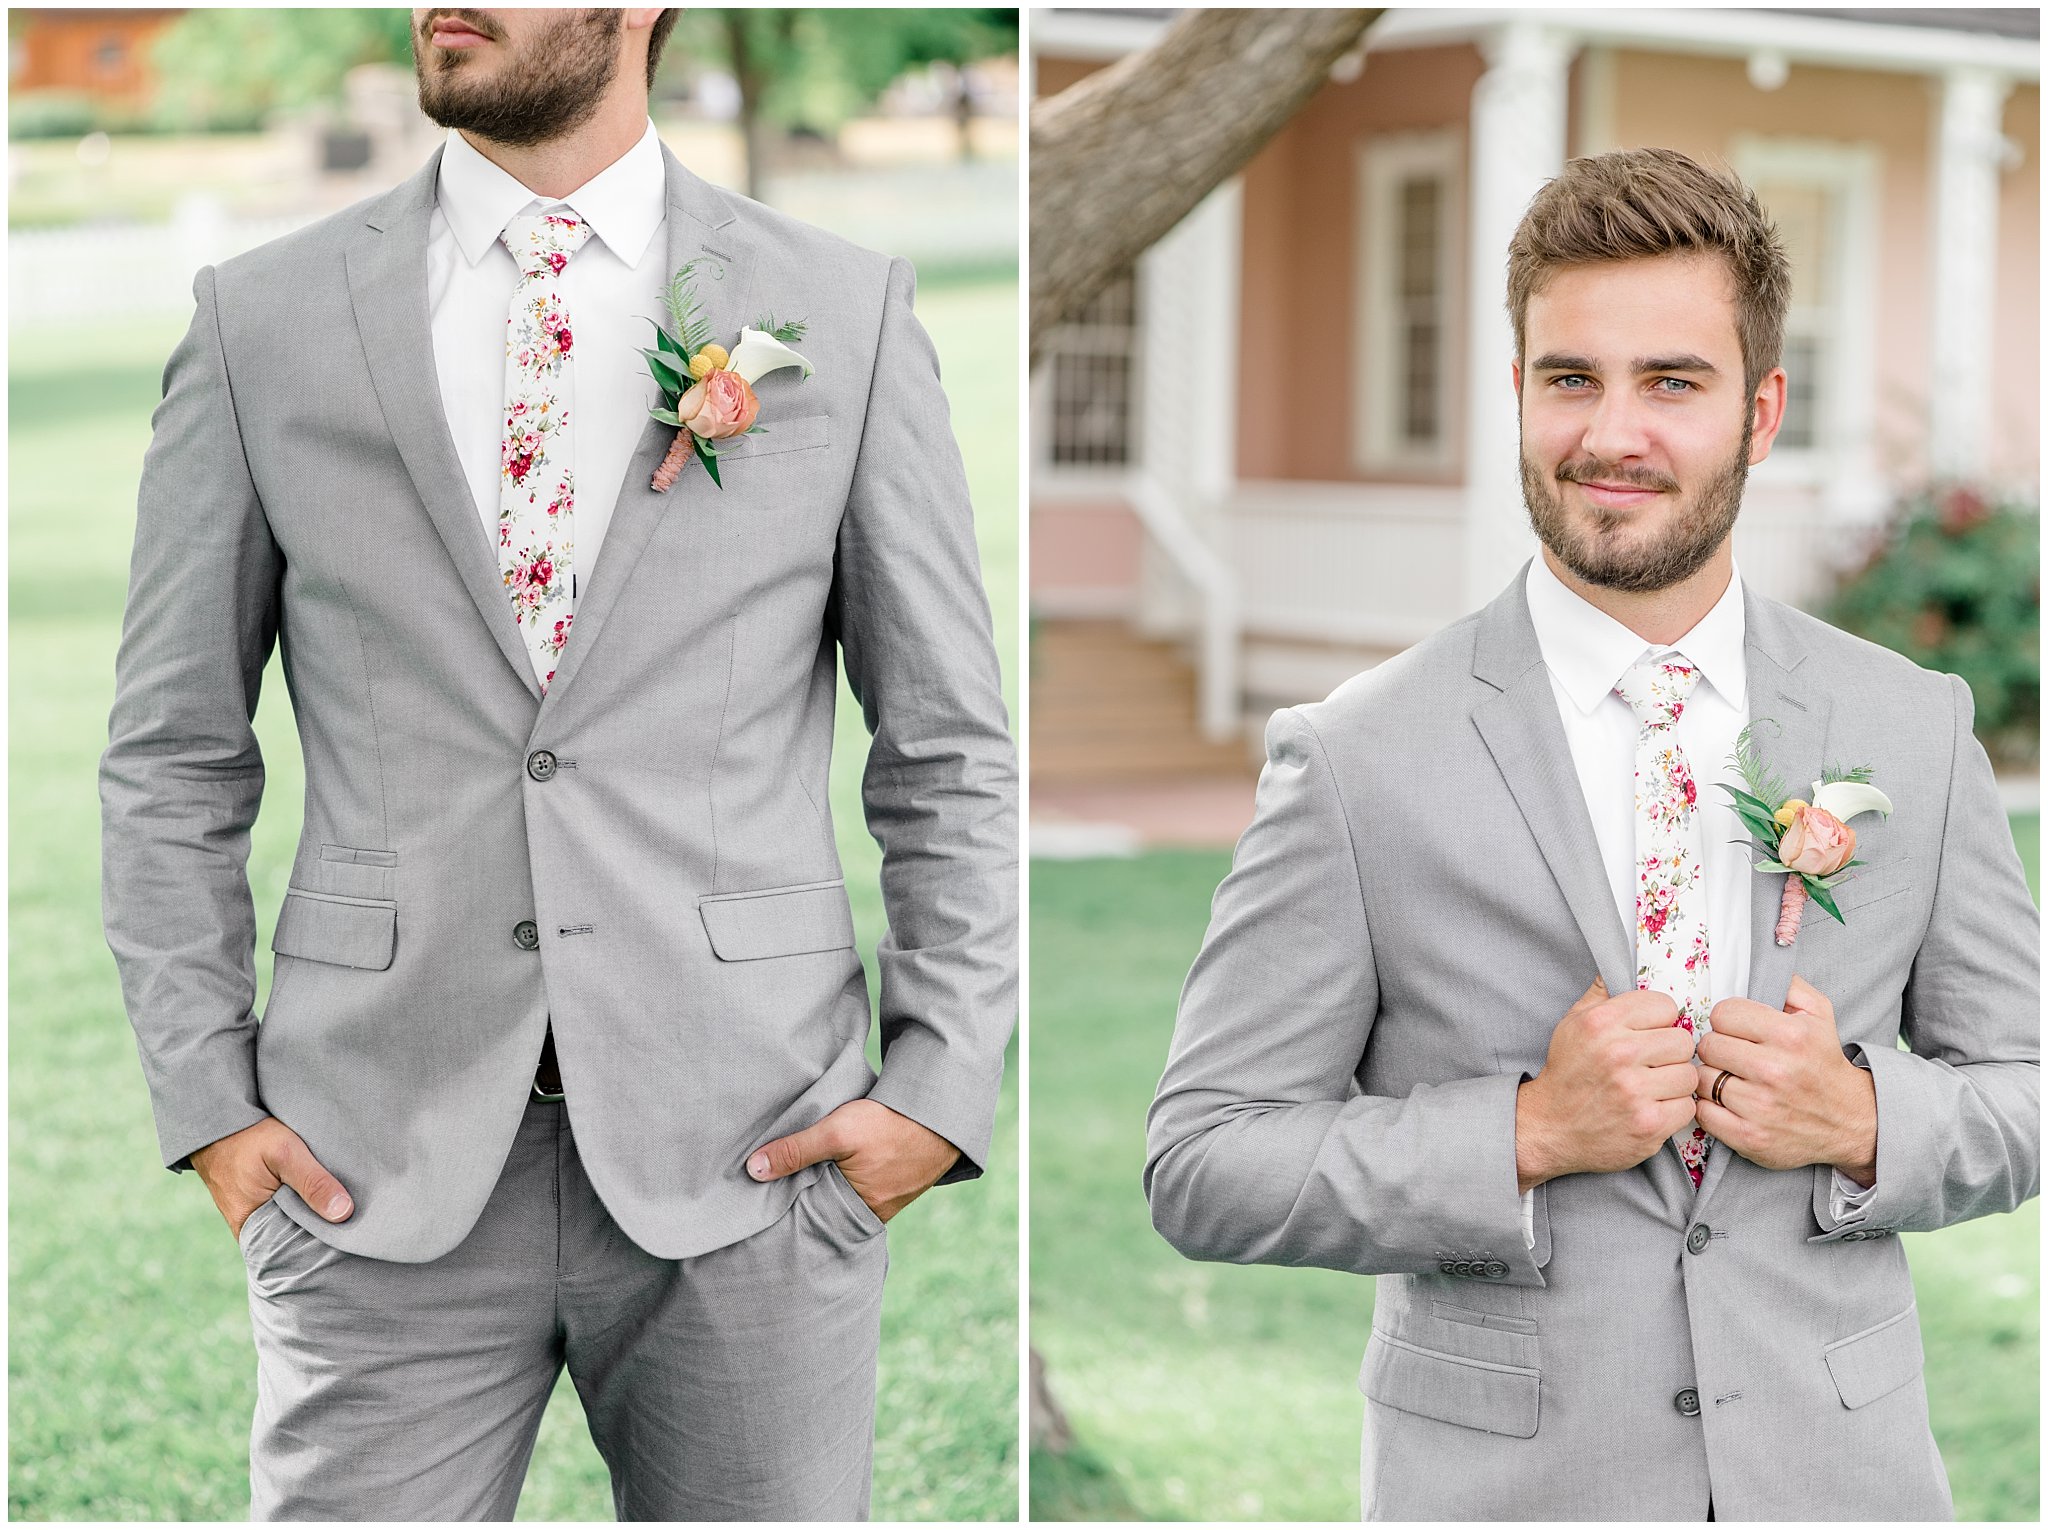 Groom in floral tie and grey suit | This is the Place Heritage Park | Green and Pink Garden Wedding | Jessie and Dallin Photography